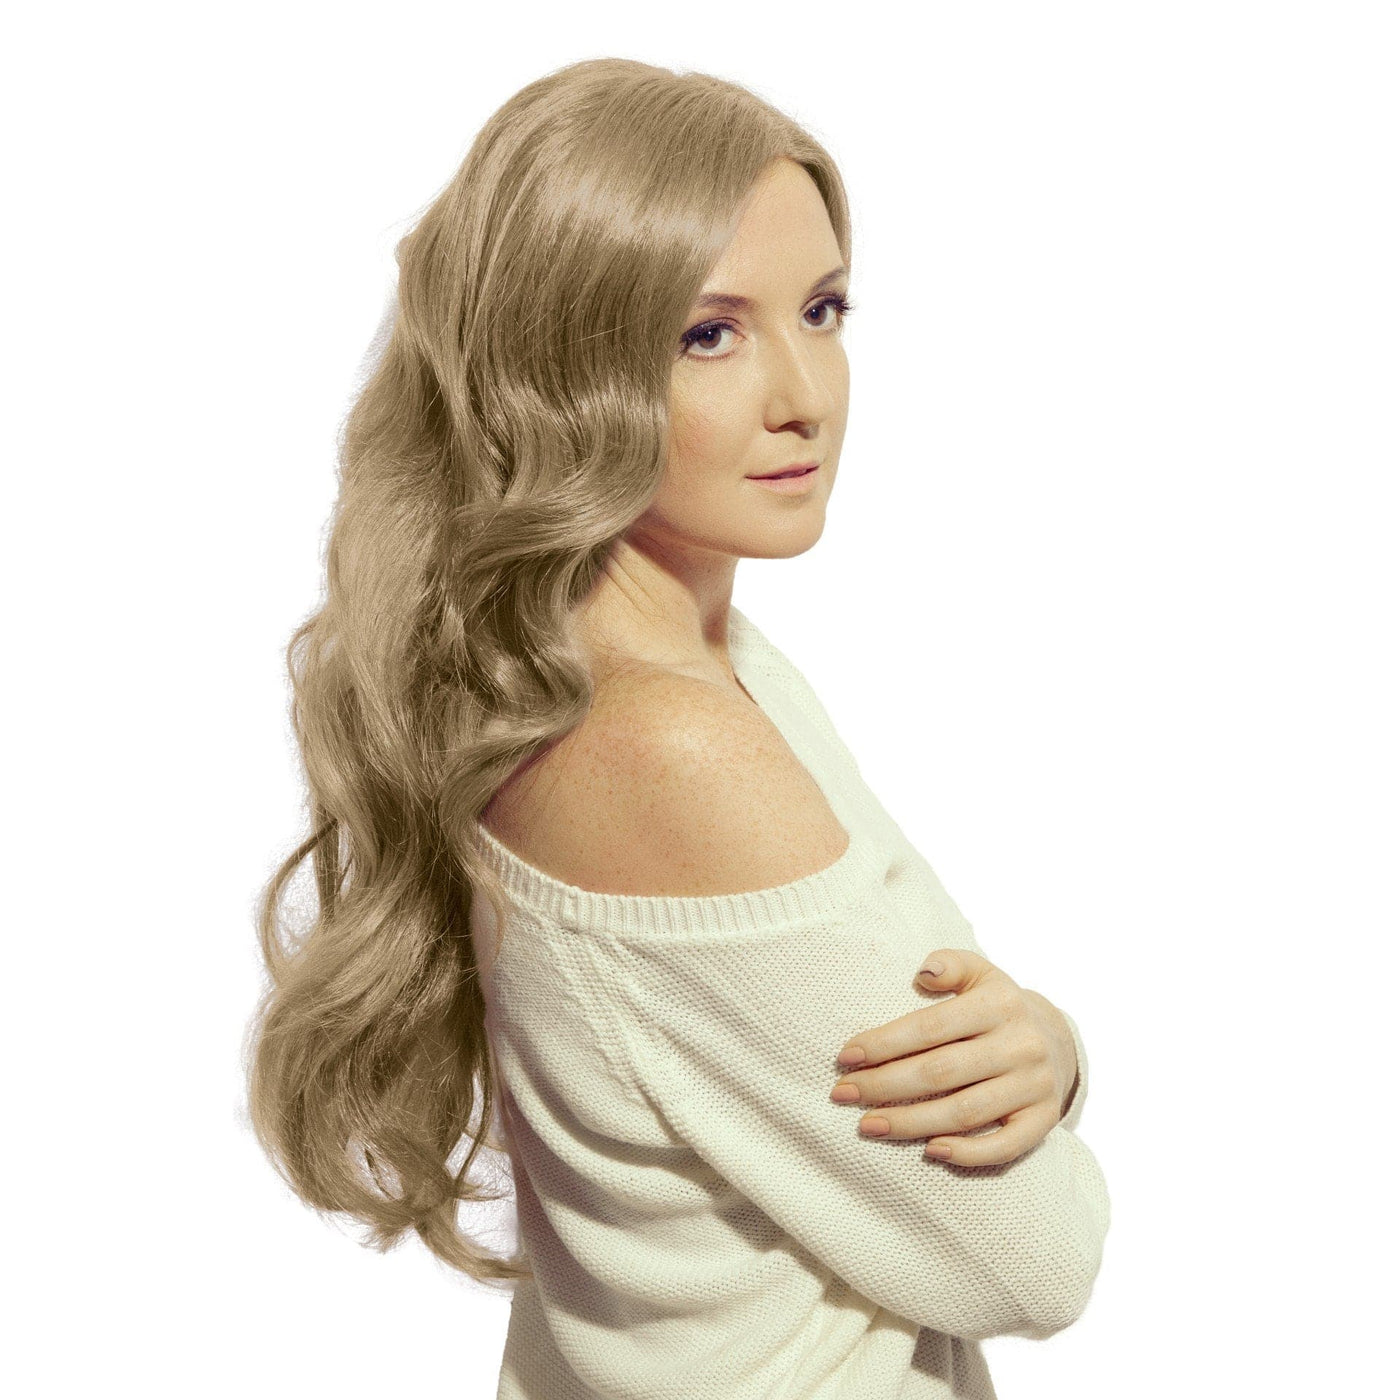 Natural Blonde | Remy Human Hair Tape-Ins